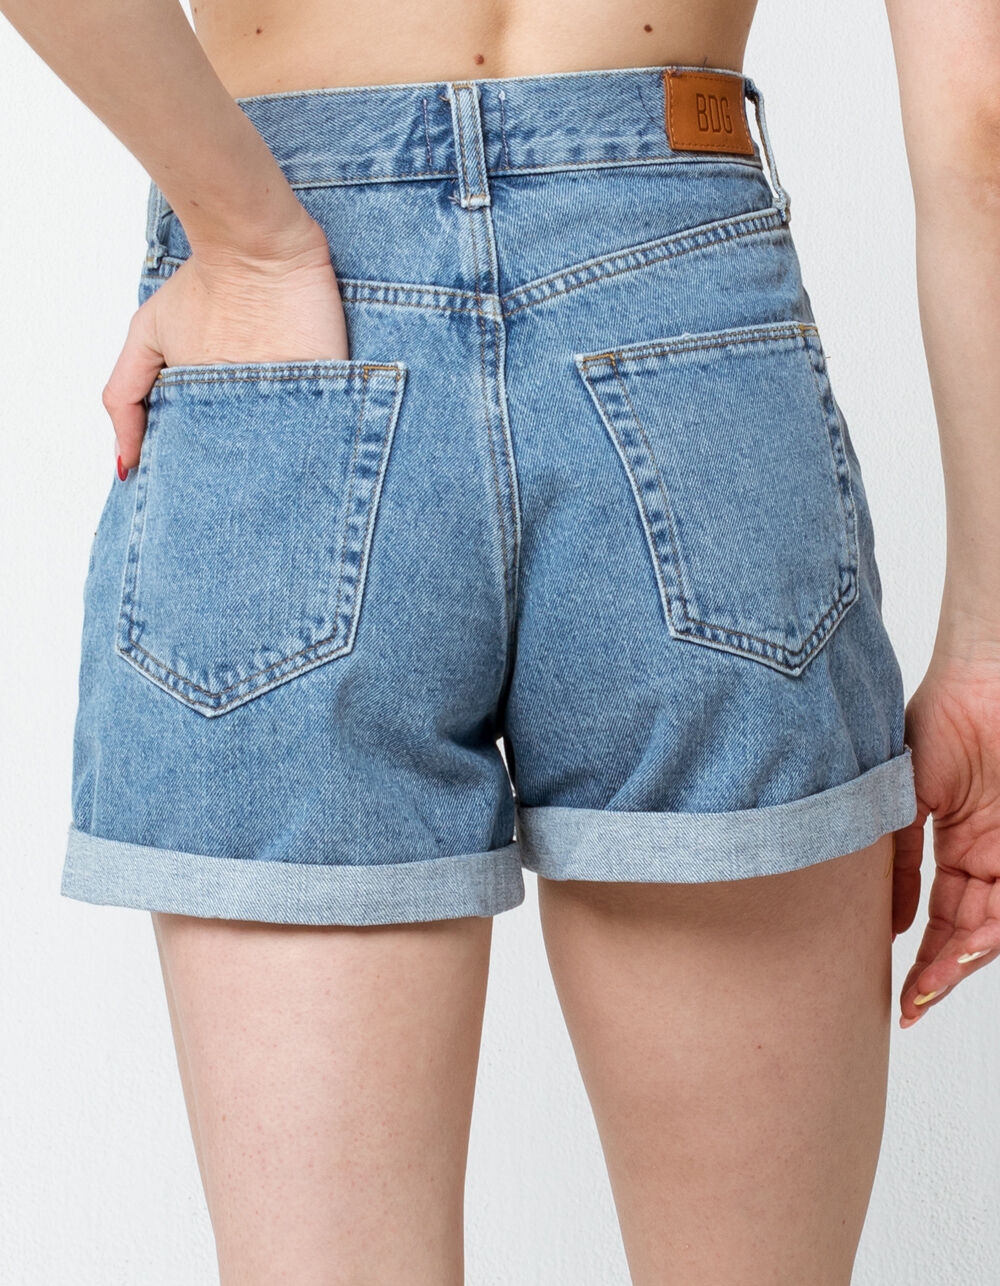 BDG Urban Outfitters Rolled Hem Womens Mom Shorts